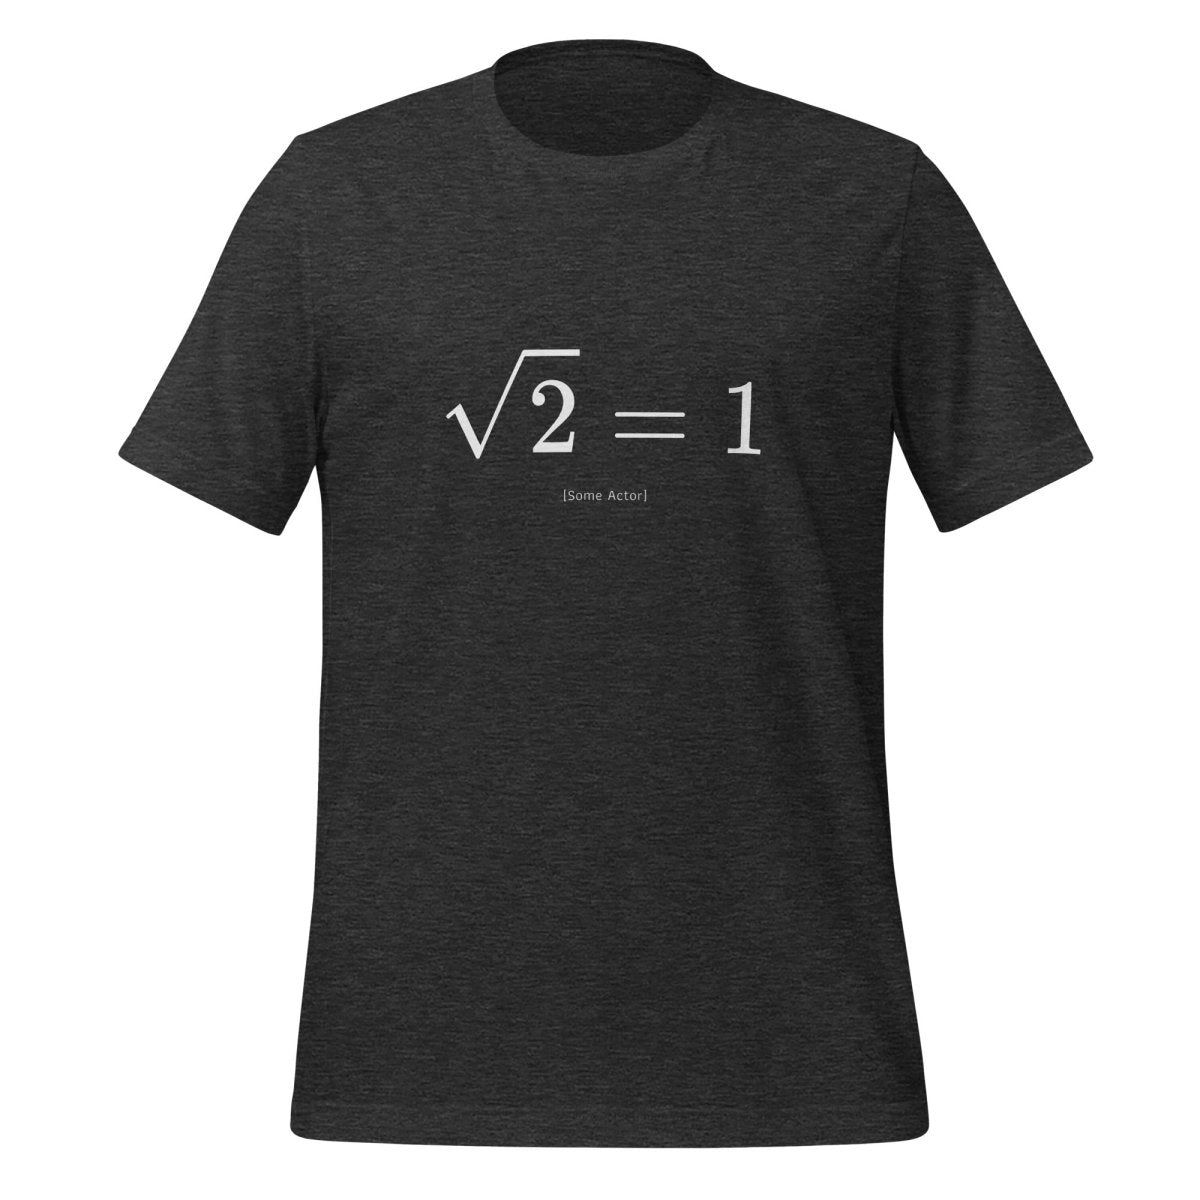 The Square Root of 2 Equals 1 T - Shirt (unisex) - Dark Grey Heather - AI Store